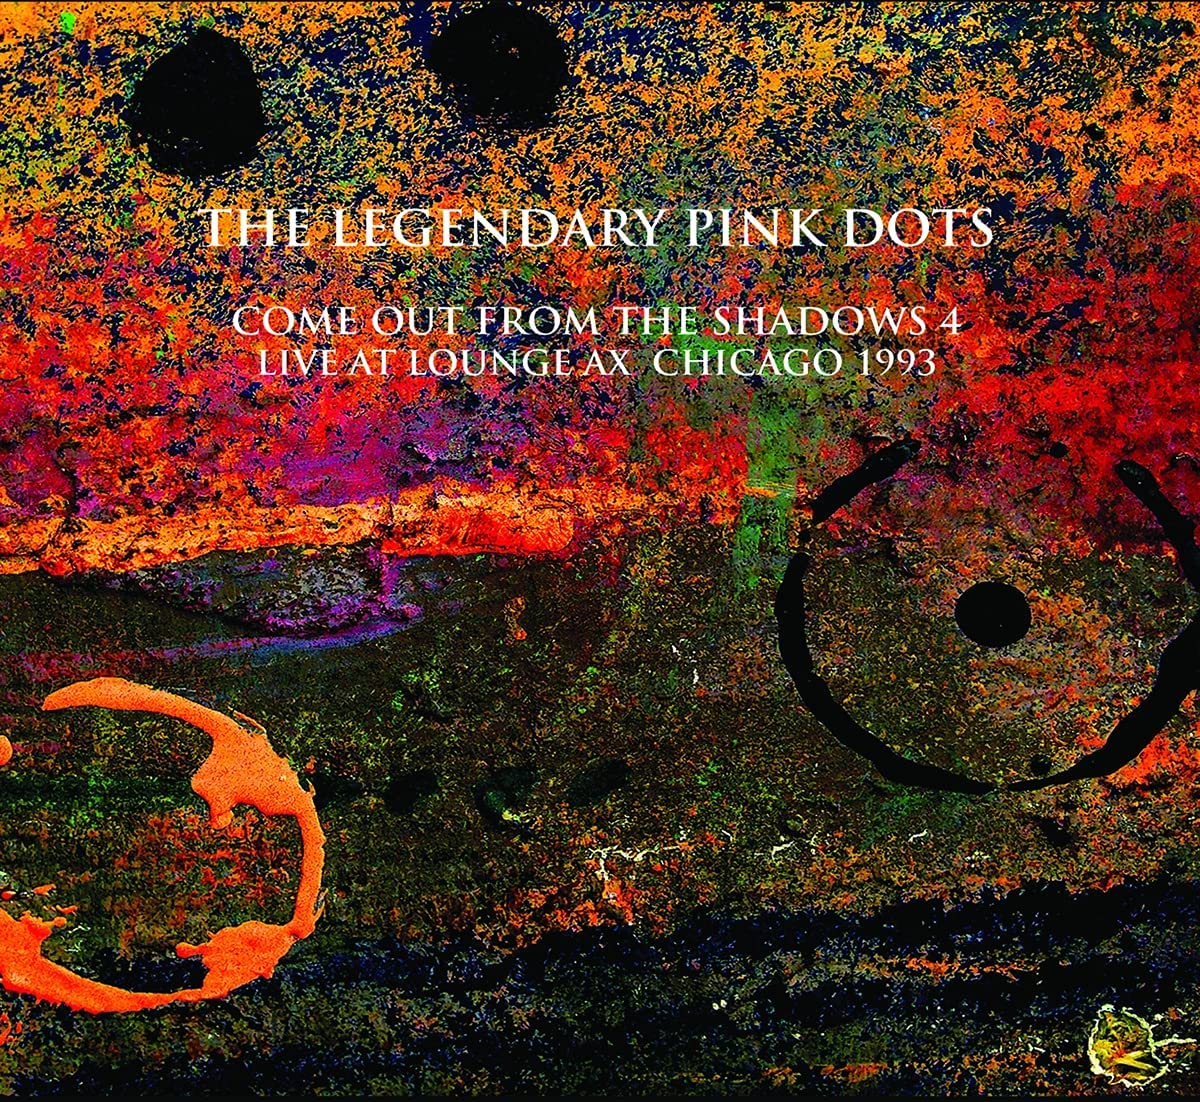 Legendary Pink Dots - Live At Lounge Ax Chicago 1993 - 2CD